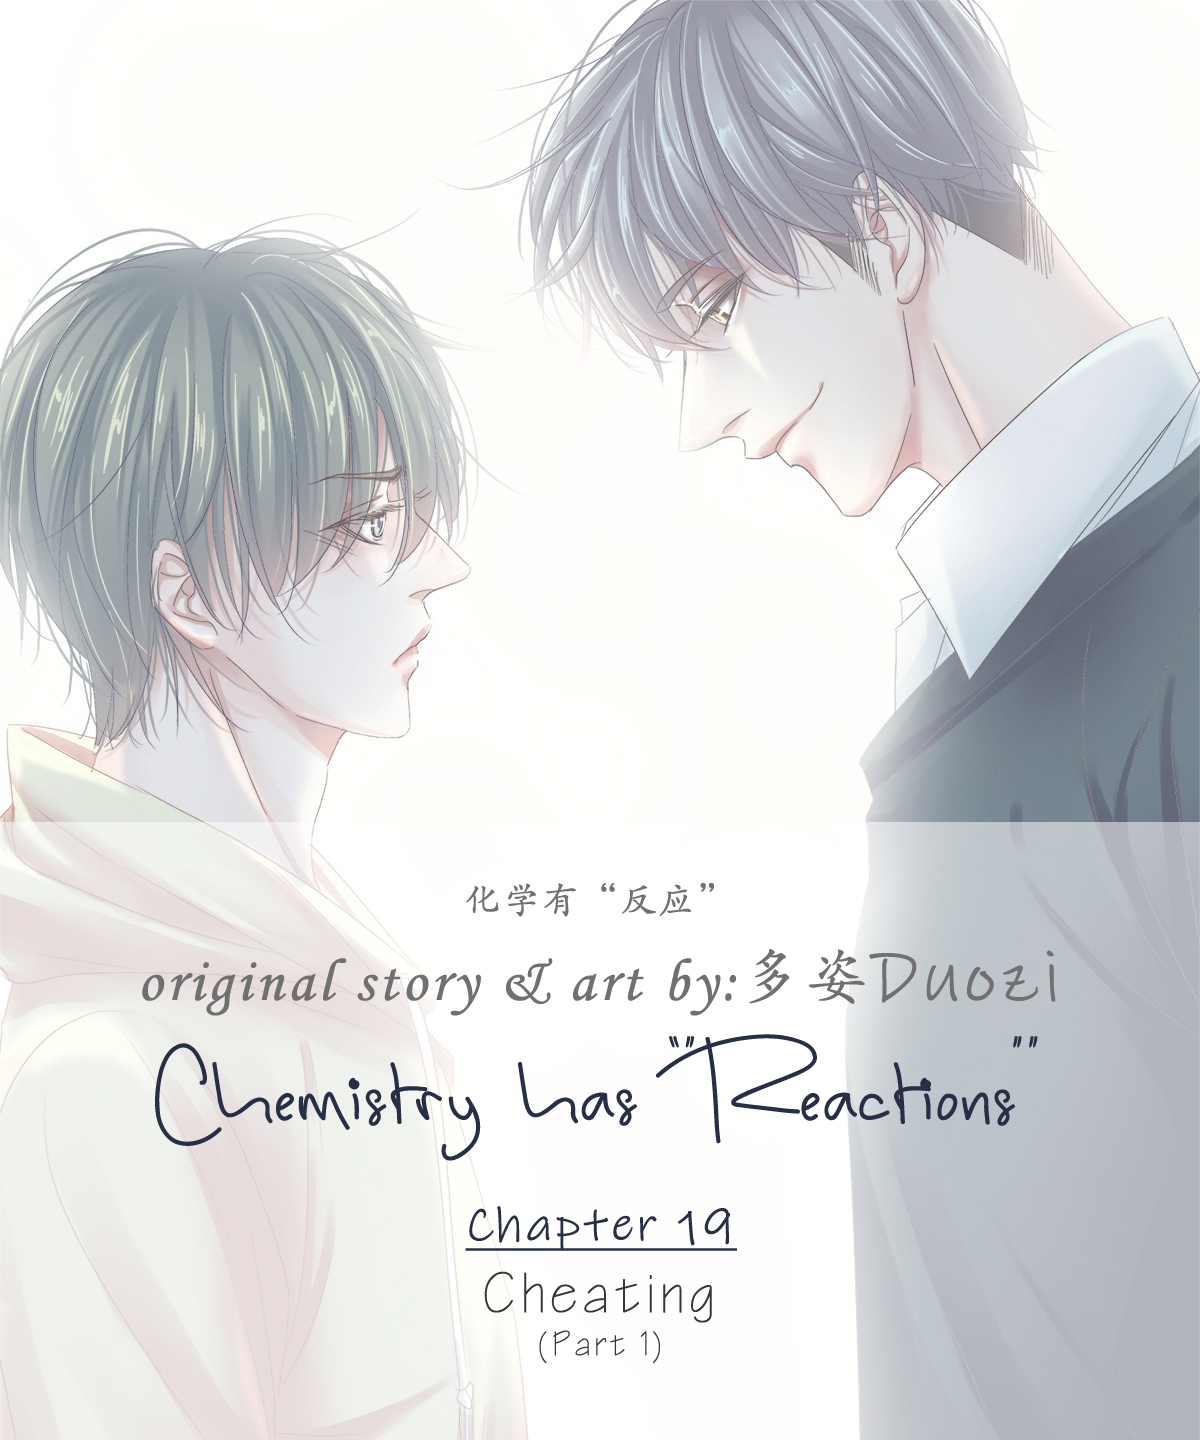 Chemistry has "Reactions" Vol. 1 Ch. 19